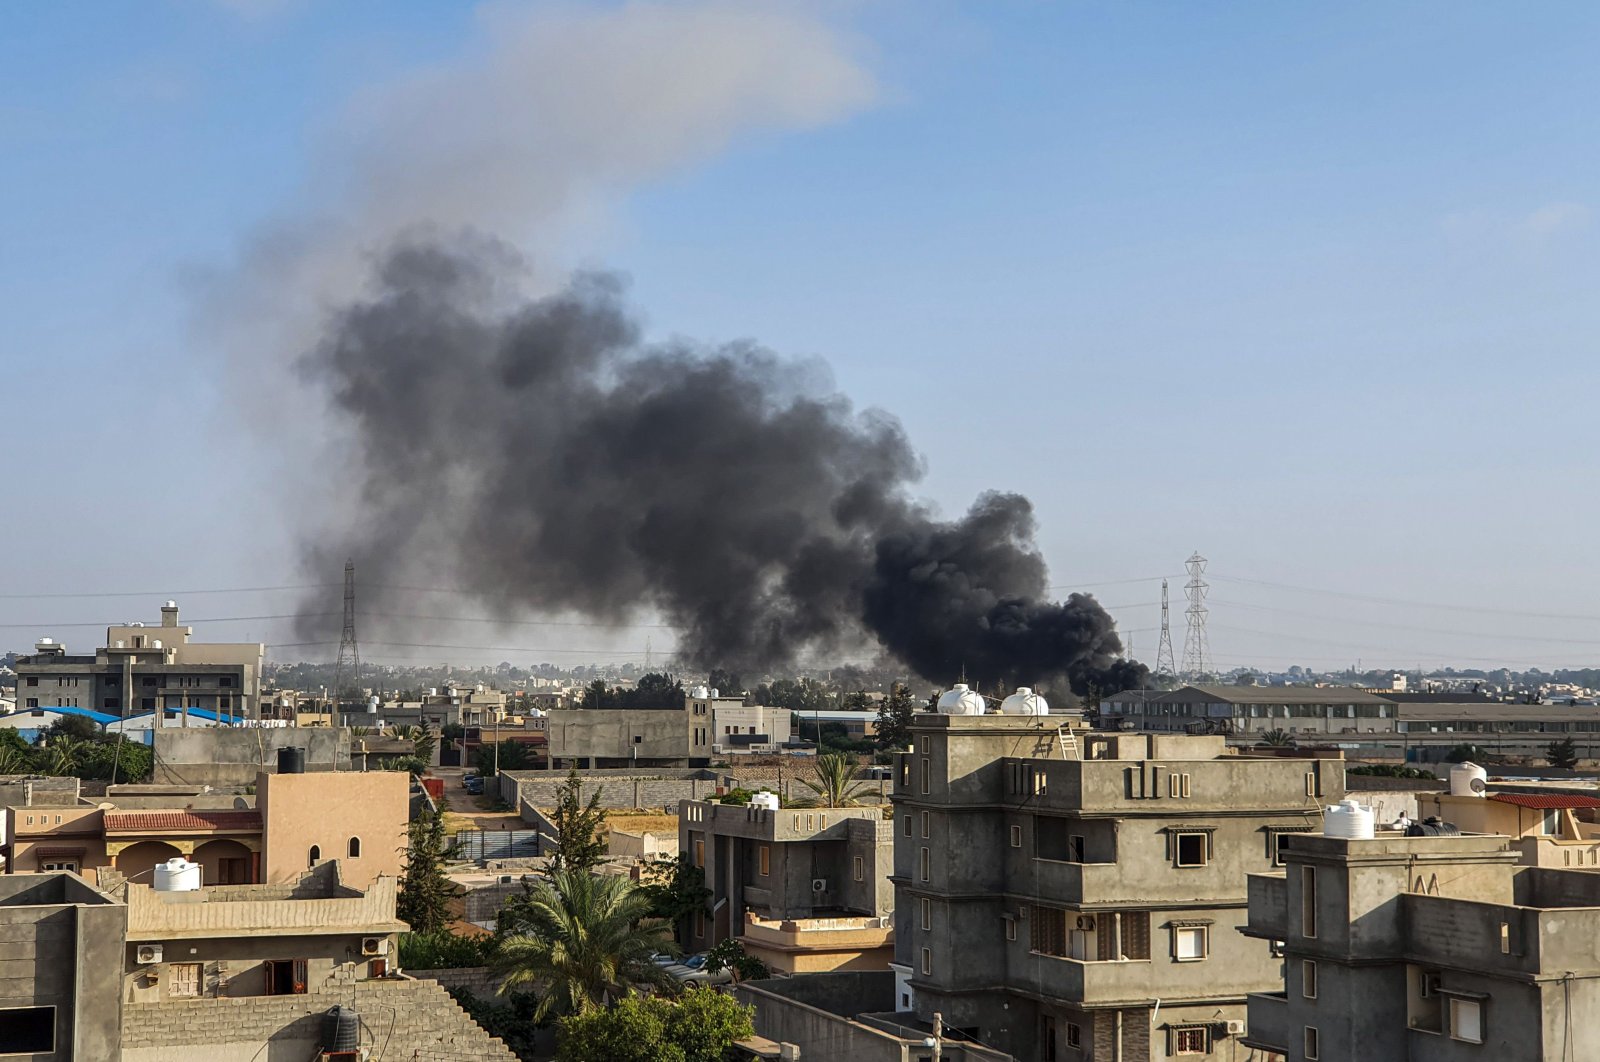 This picture taken on June 29, 2019, shows smoke plumes rising in Tajoura, south of the Libyan capital Tripoli, following a reported airstrike by forces loyal to warlord Khalifa Haftar. (AFP Photo)